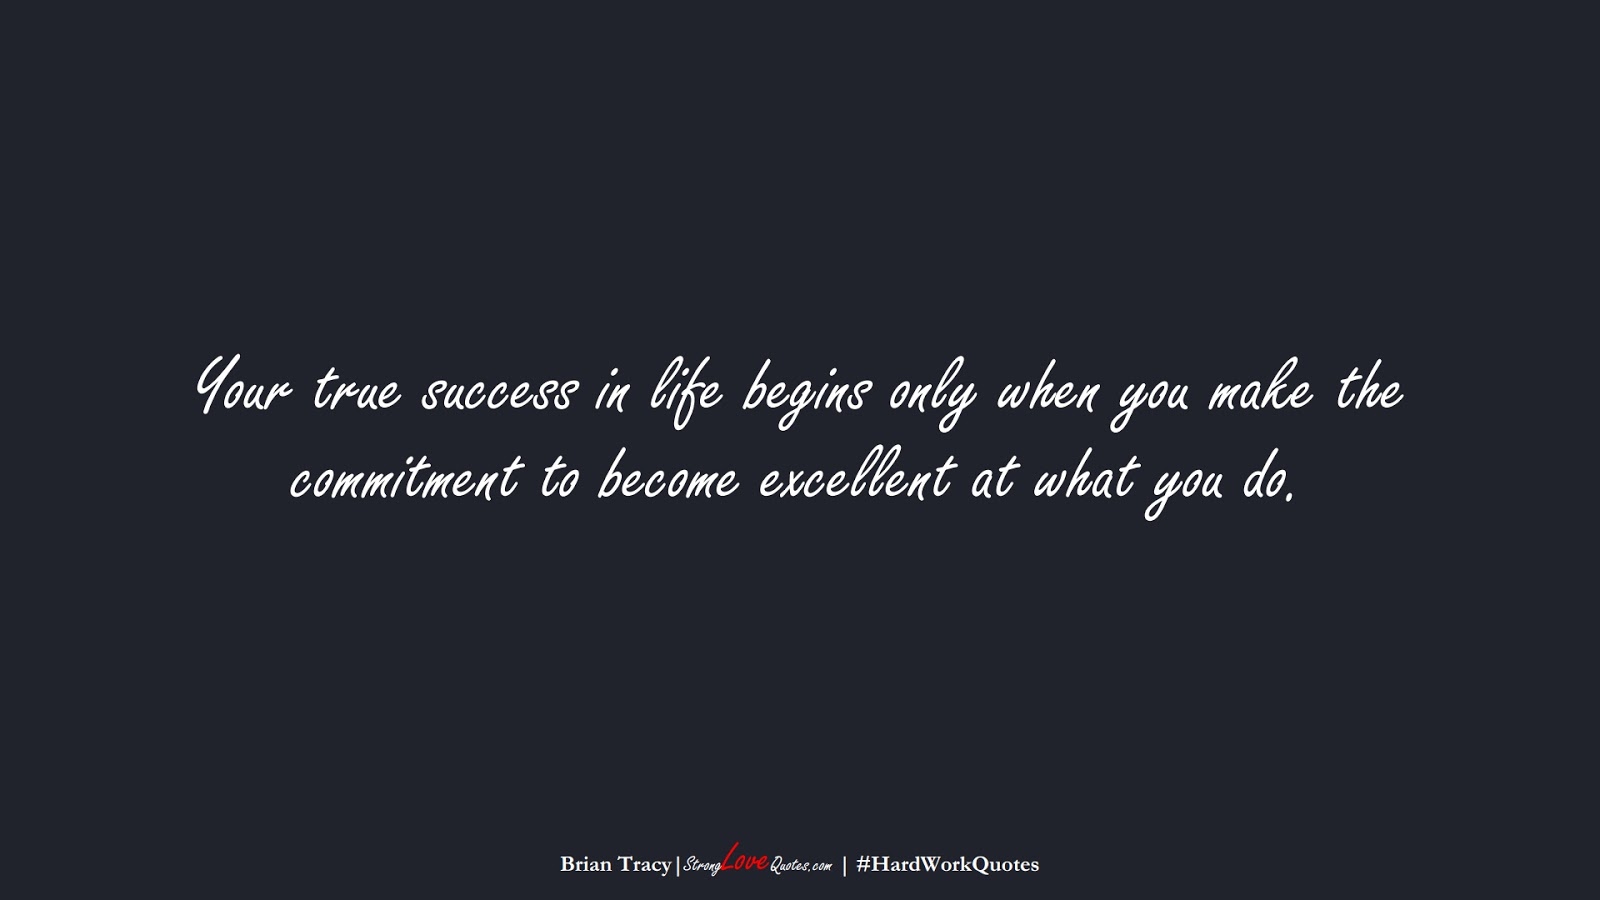 Your true success in life begins only when you make the commitment to become excellent at what you do. (Brian Tracy);  #HardWorkQuotes